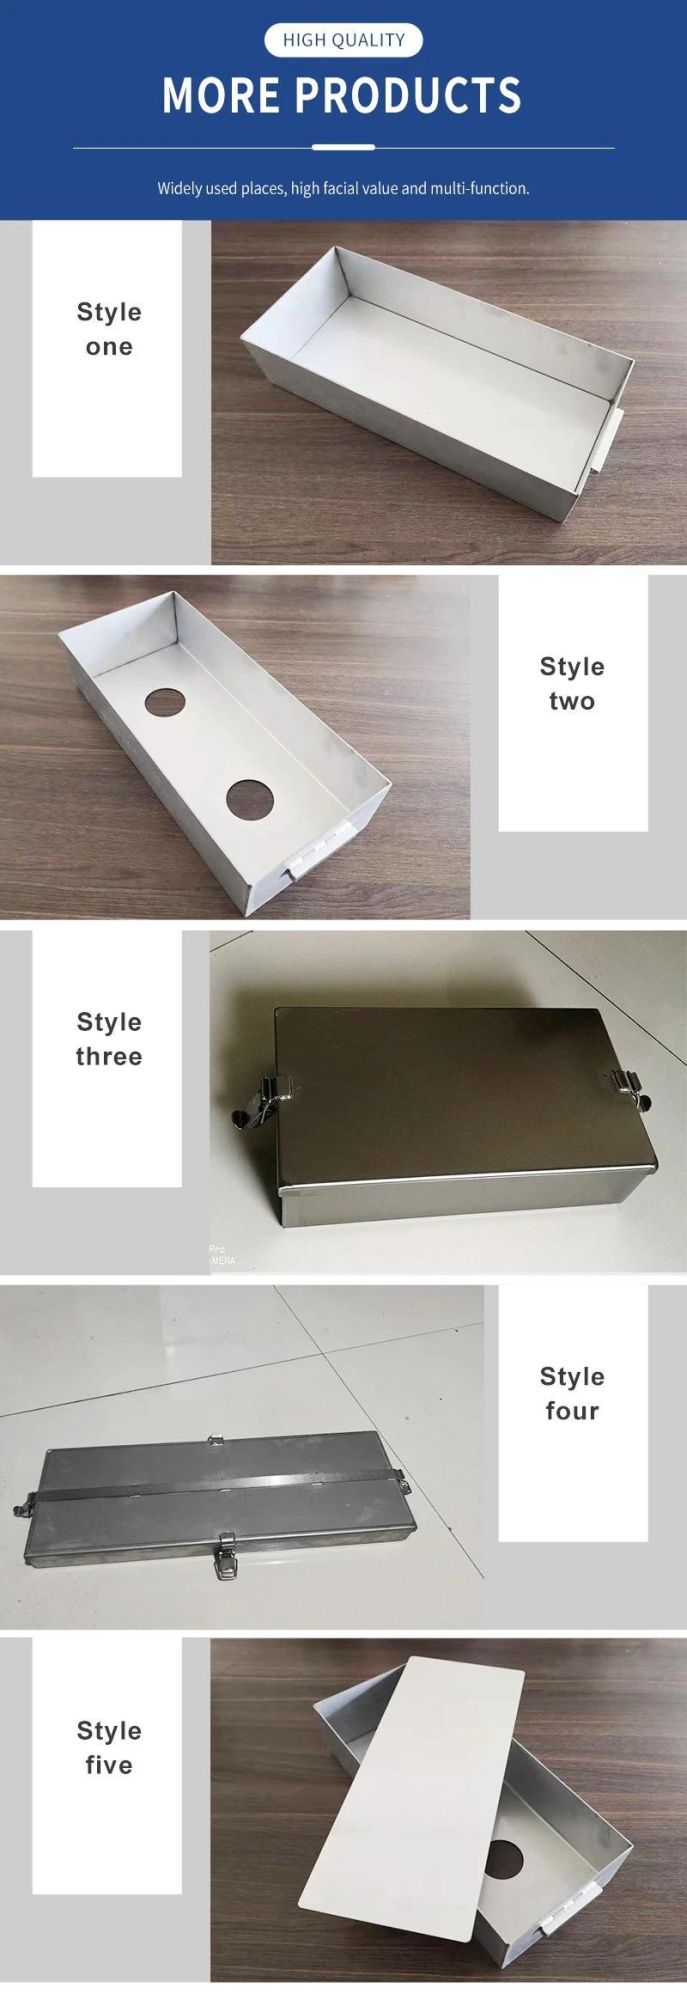 China Supplier Resin Jewelry Box Mold with Different Sizes